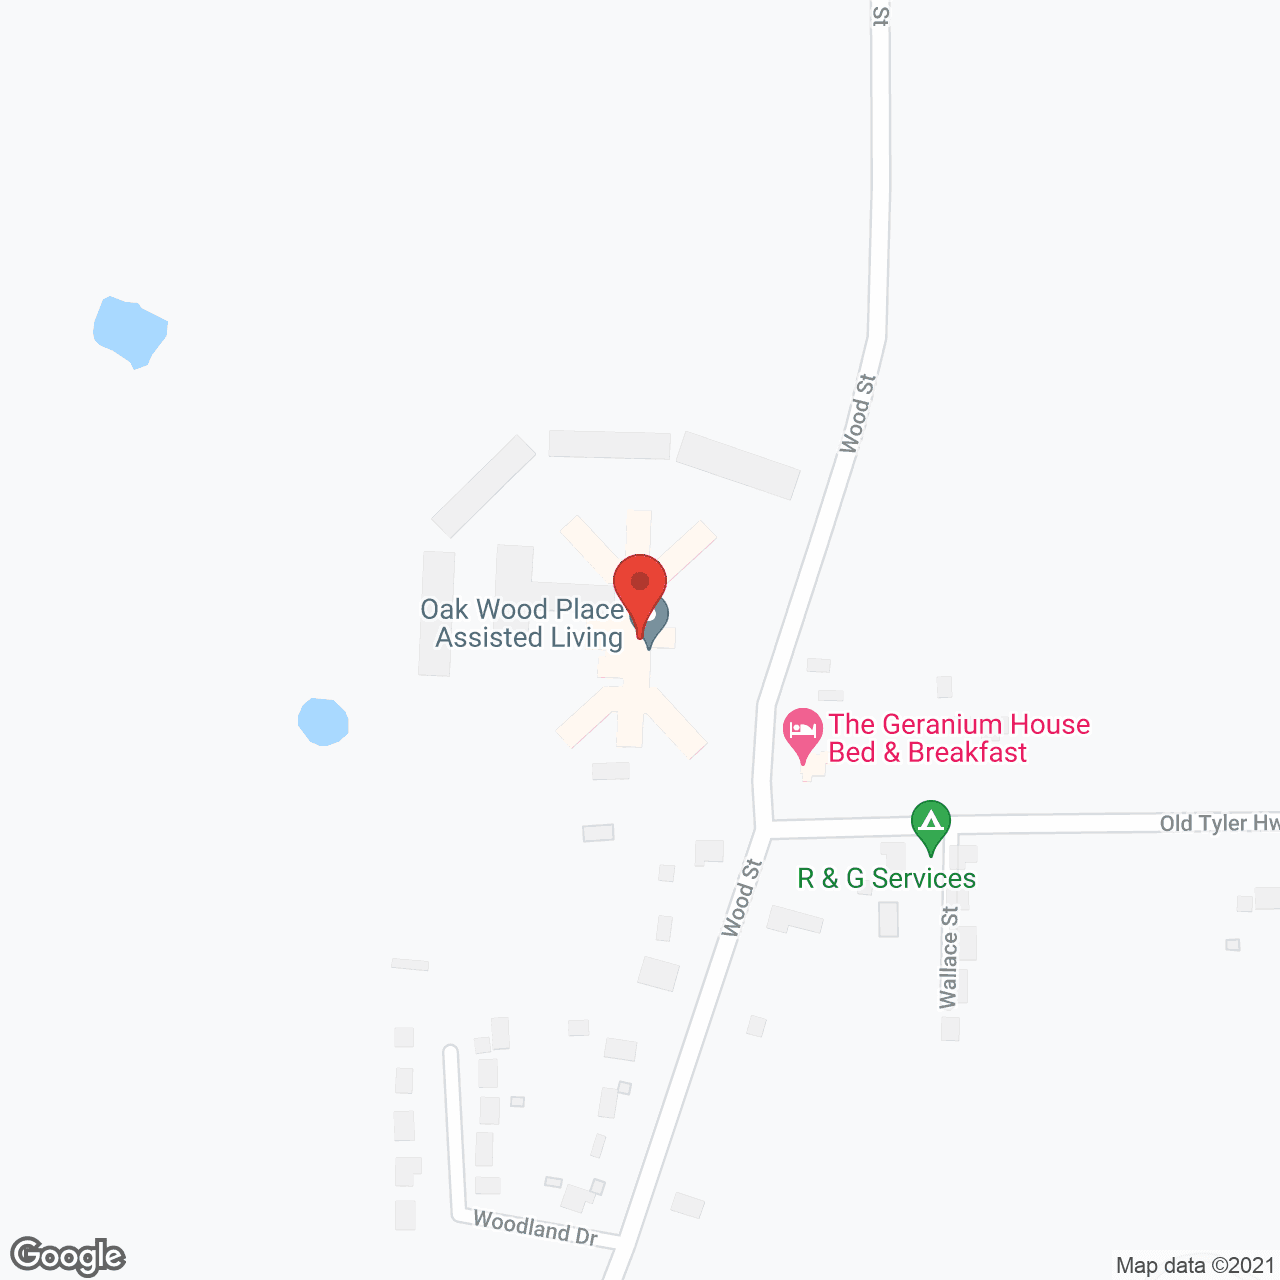 Oak Wood Place Assisted Living in google map